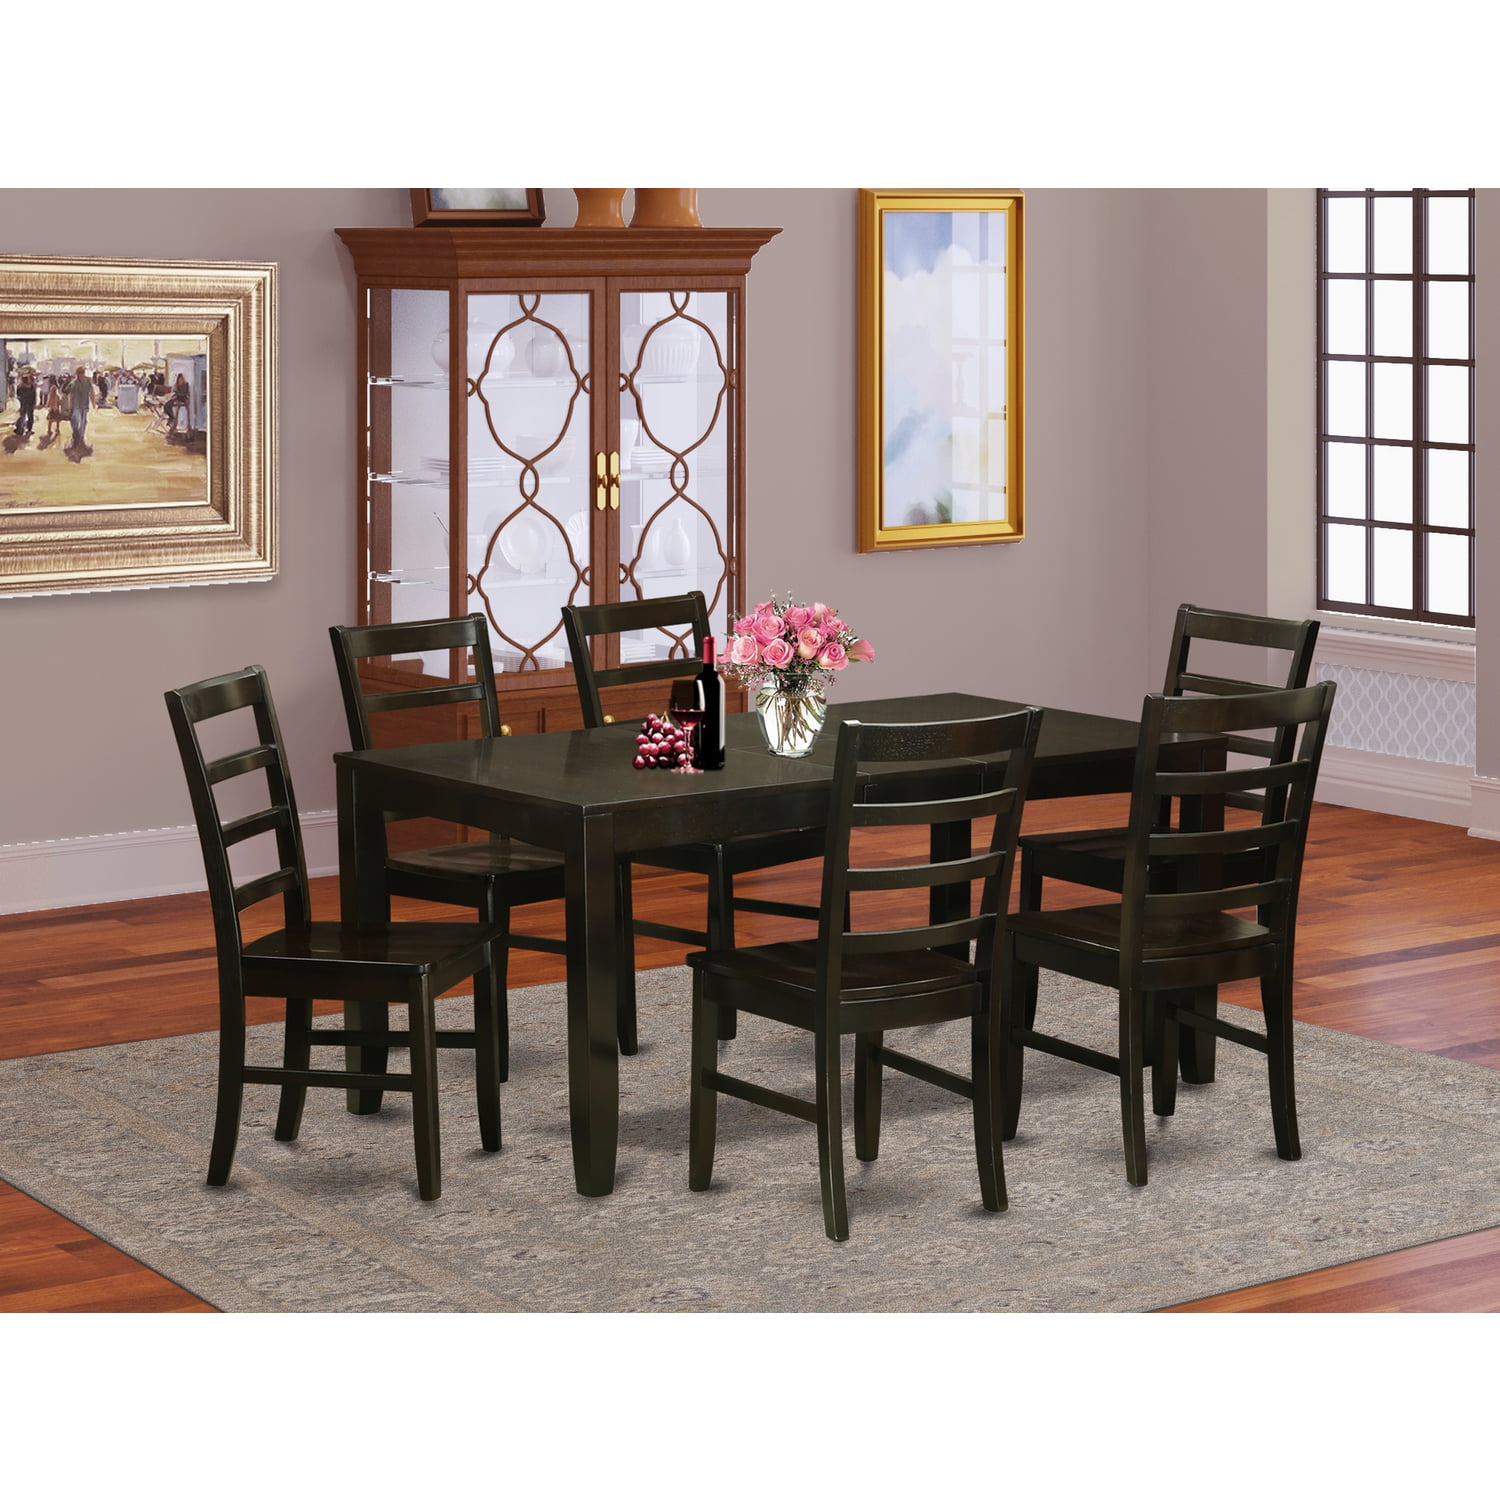 Dining Room Set-Dining Table With Leaf And Dining Chairs-Finish